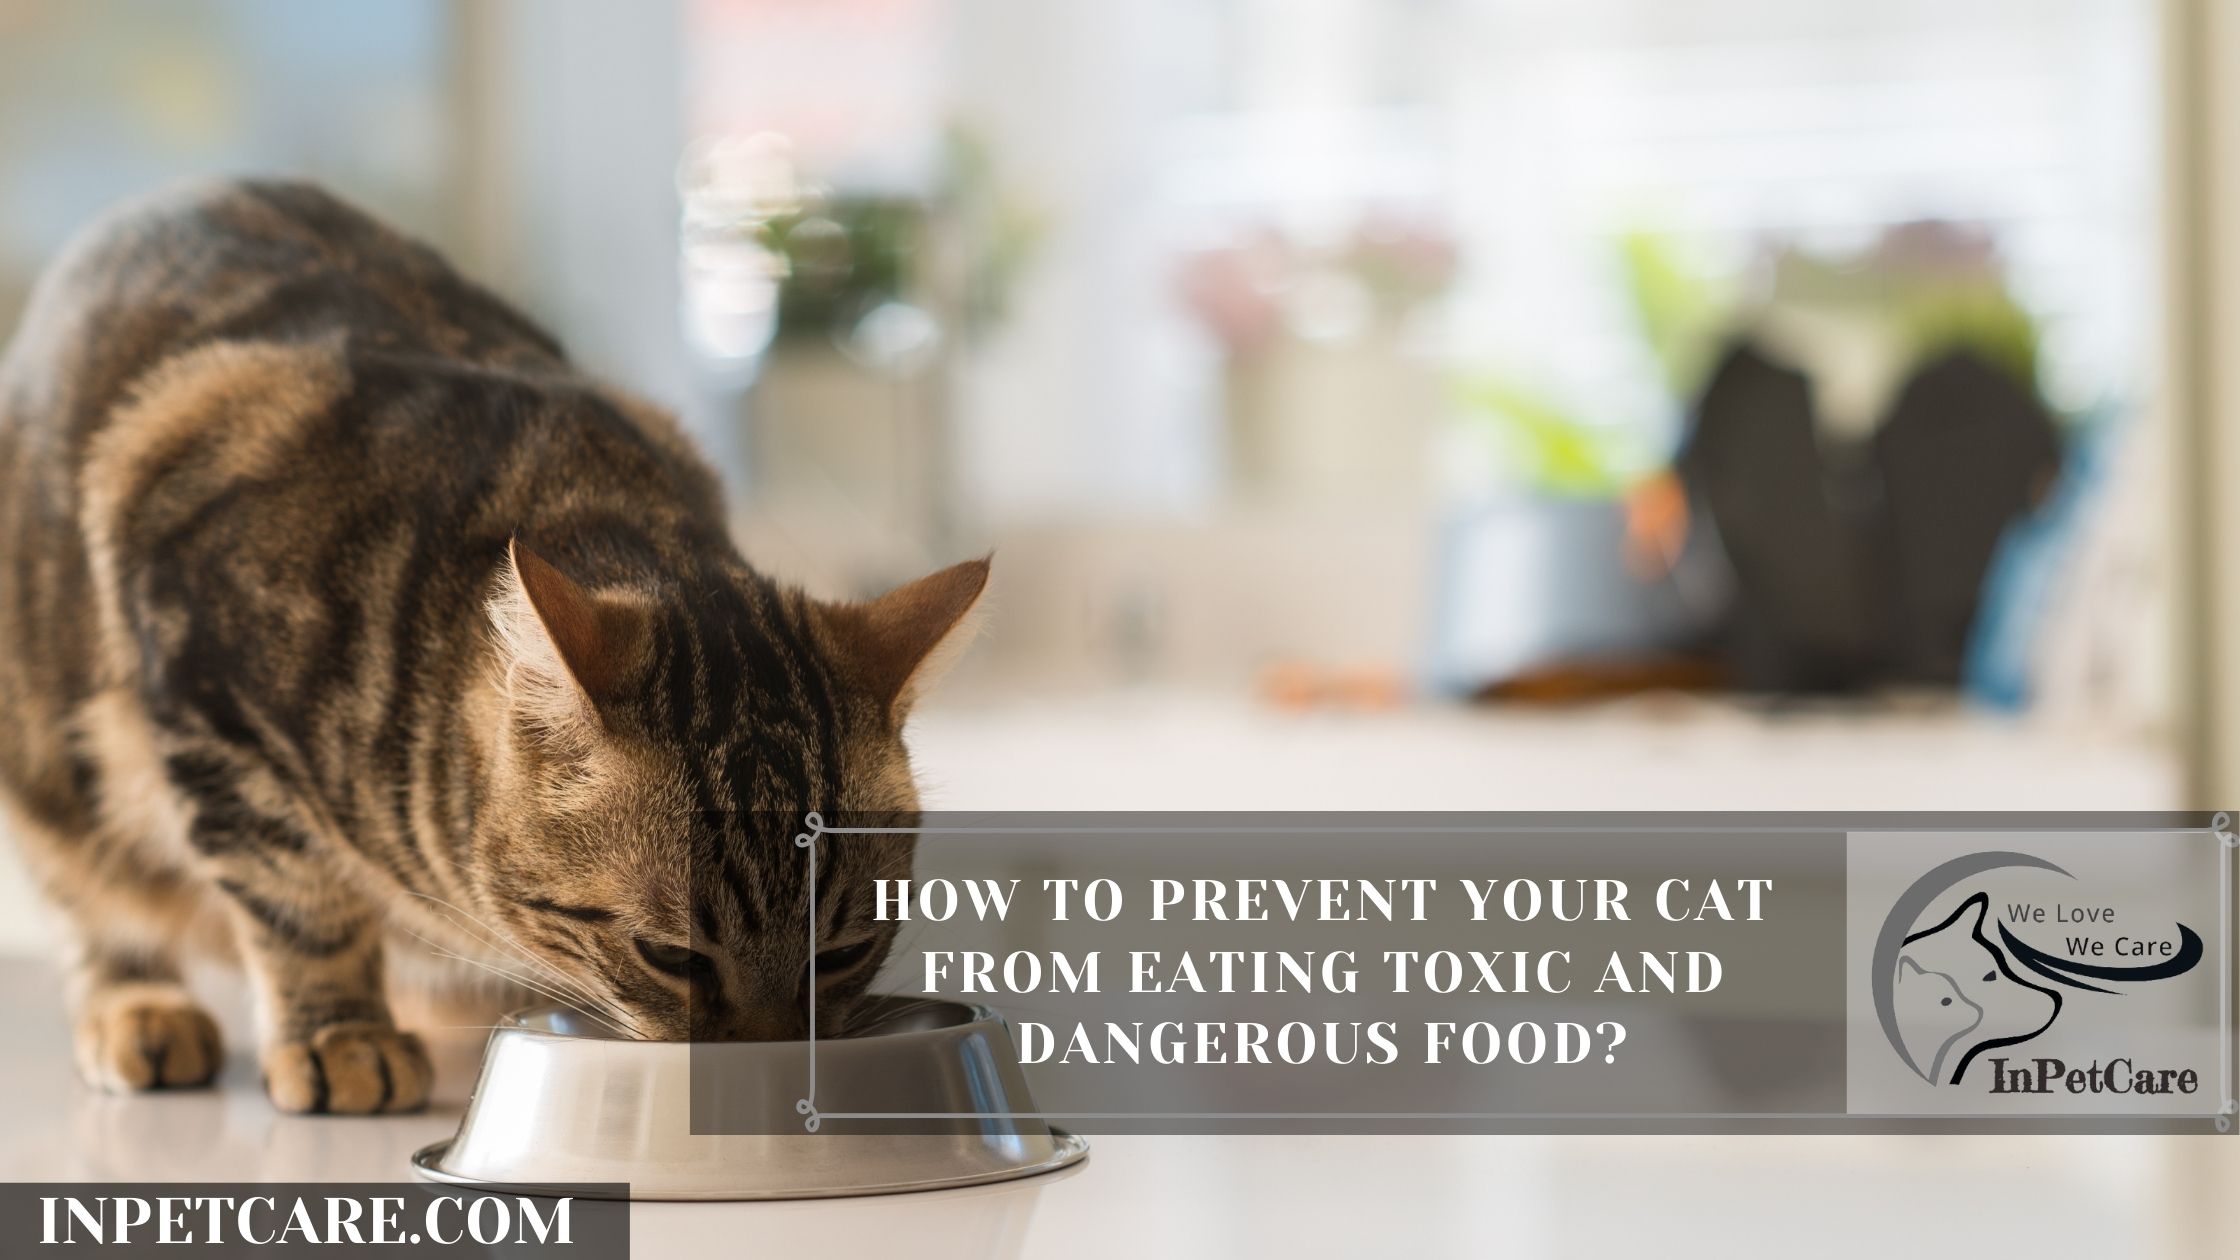 How To Prevent Your Cat From Eating Toxic And Dangerous Food?